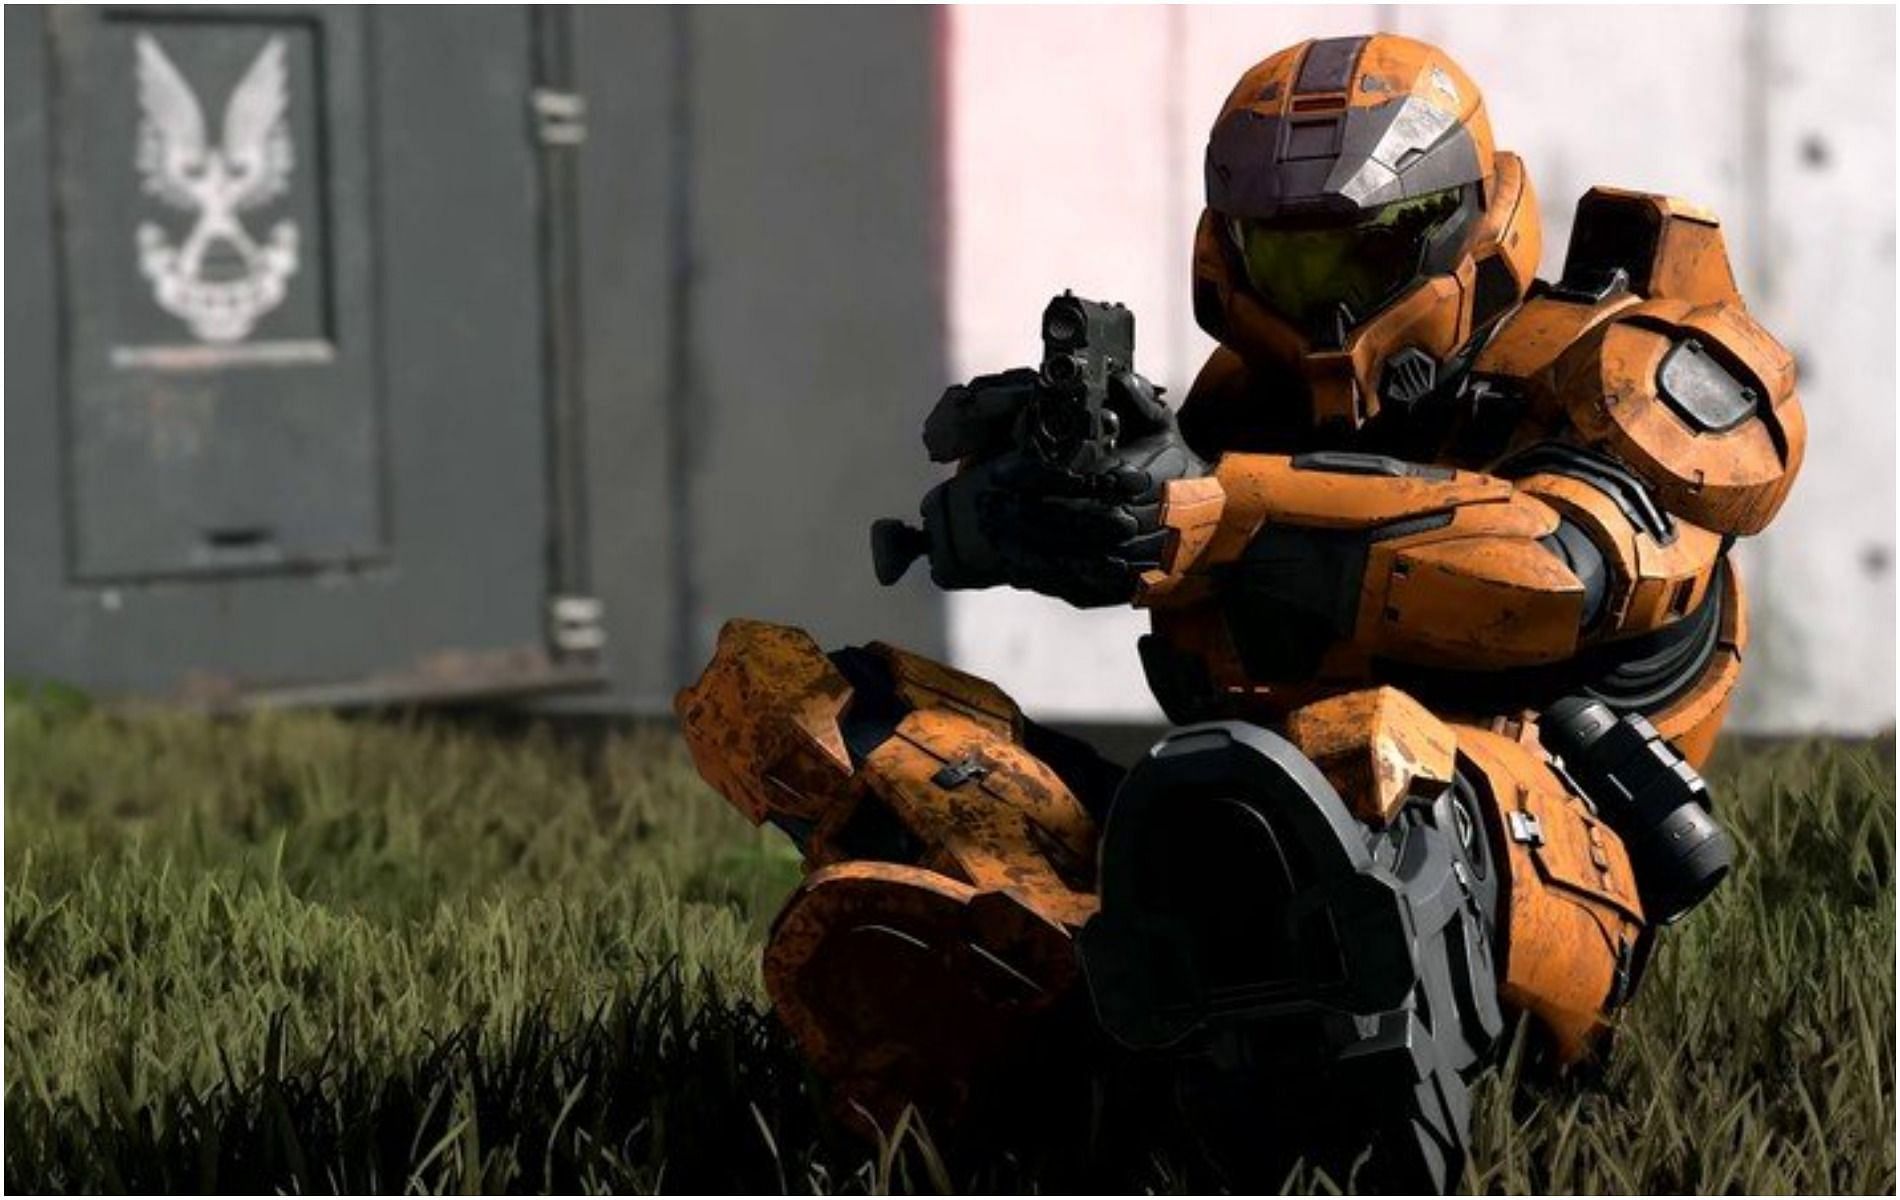 Halo Infinite: All abilities and their upgrades (Image via Halo infinite)